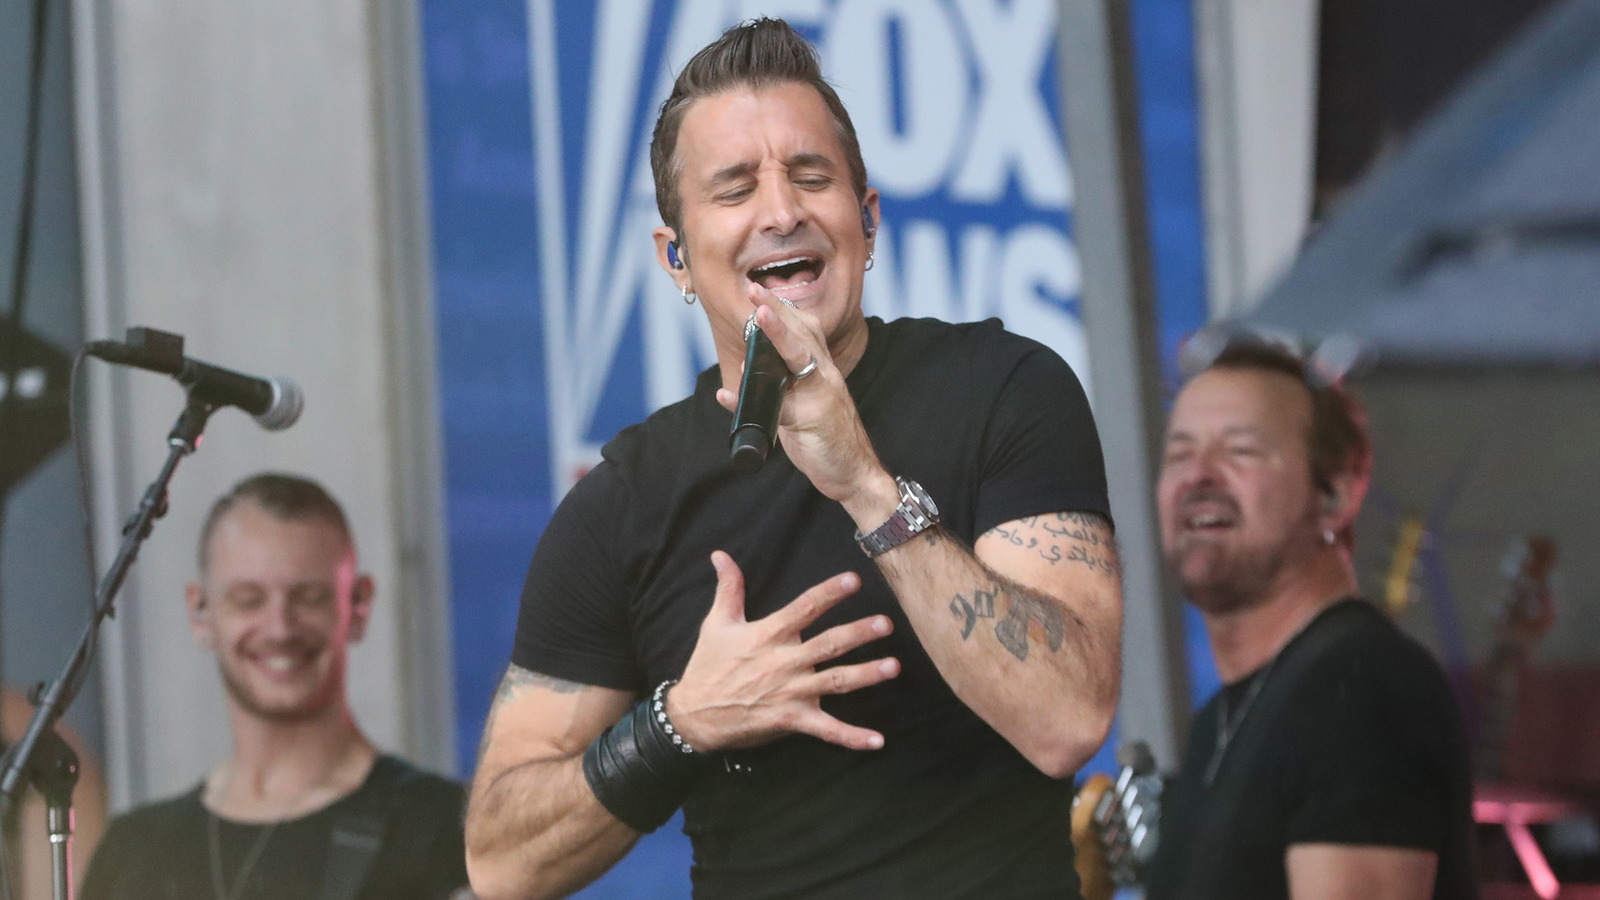 The Unexpected Acting Role Creeds Scott Stapp Has In The Reagan Biopic